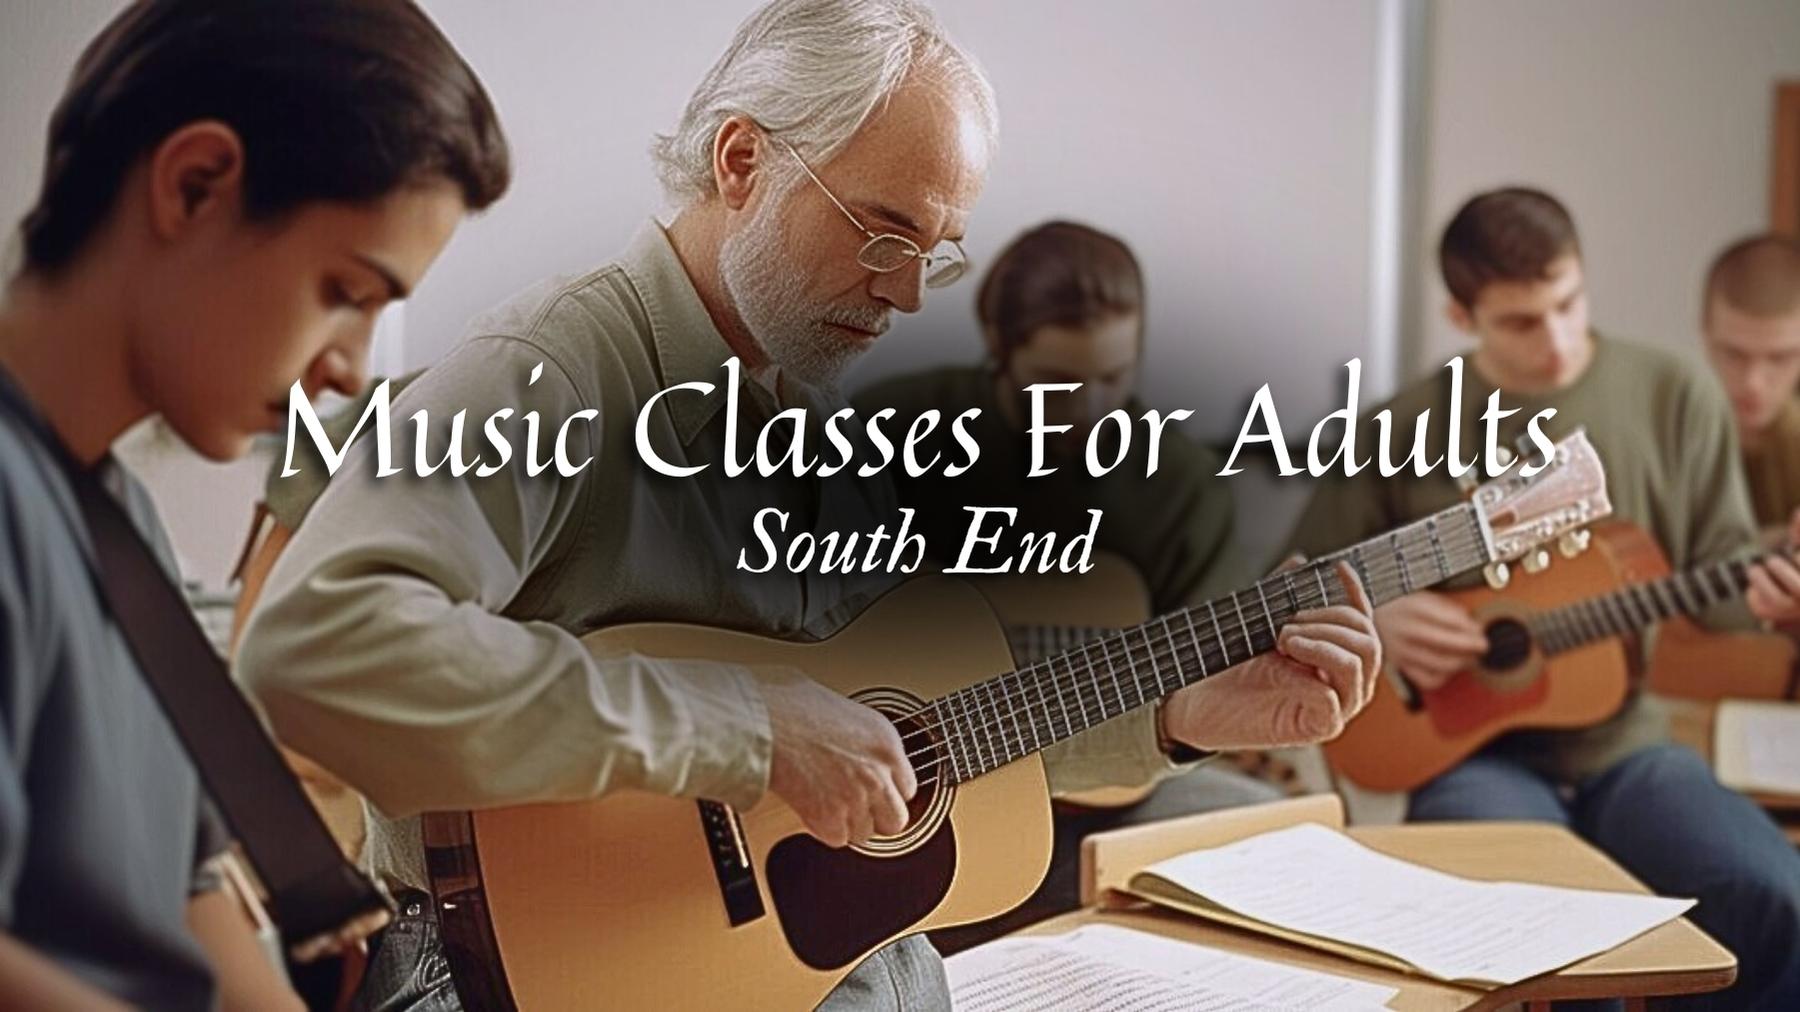 Music Classes for Adults in South End, Massachusetts